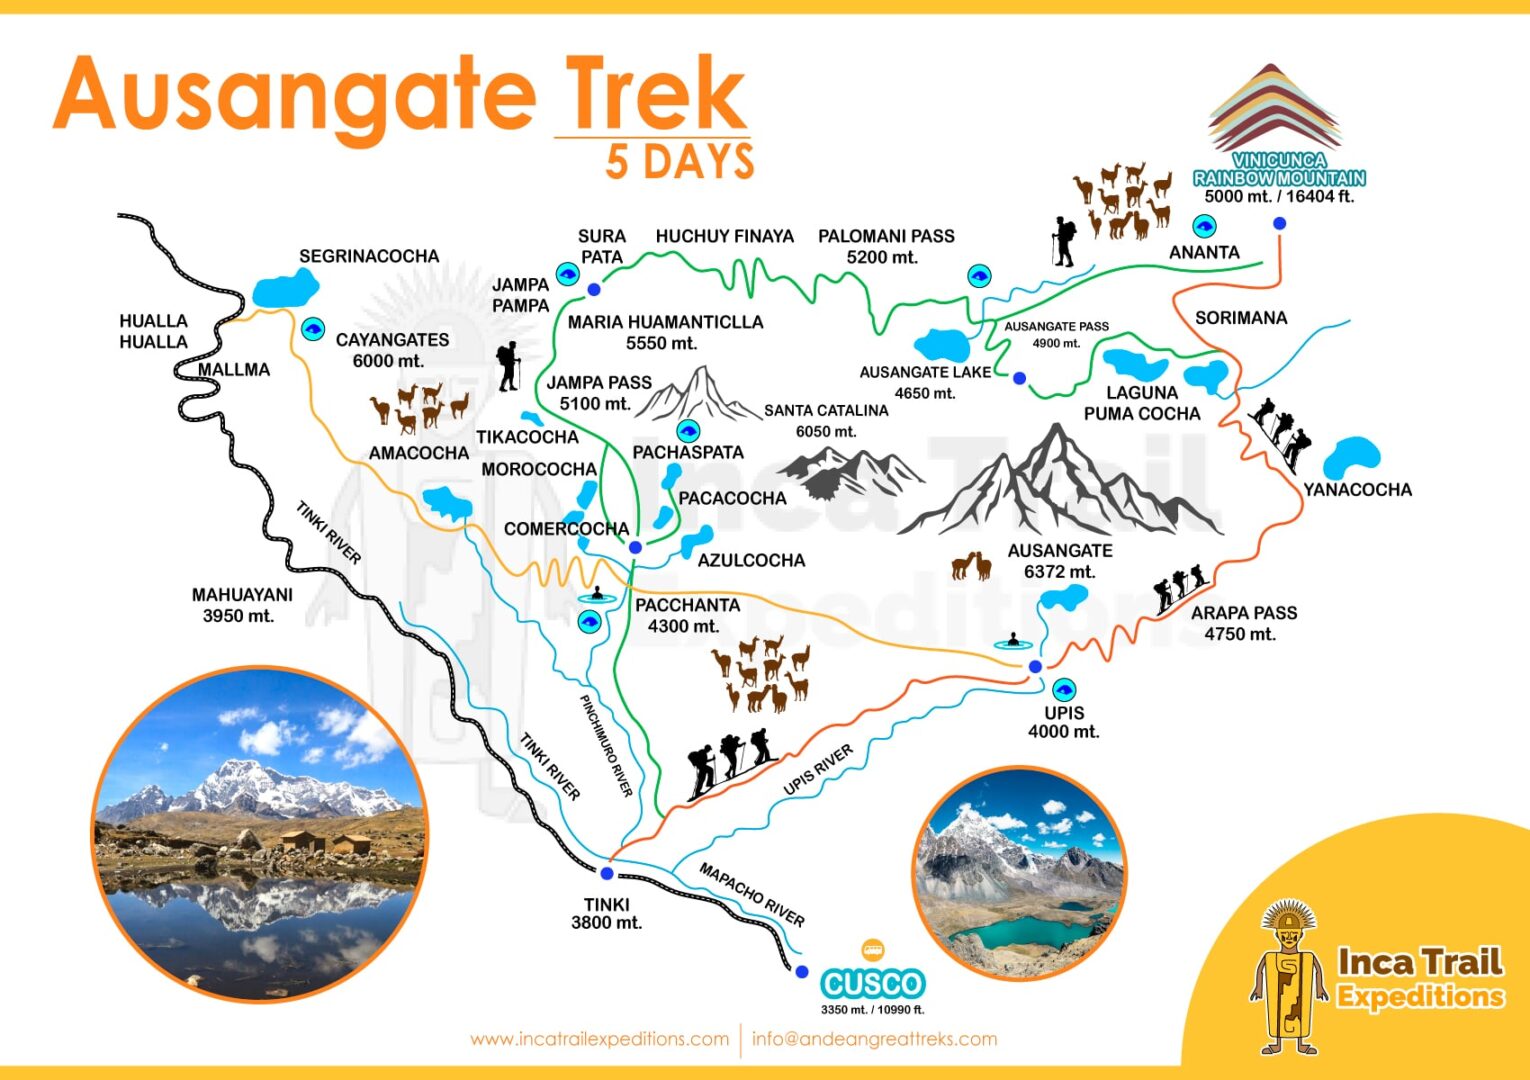 AUSANGATE-TREK-5-DAYS-BY-INCA-TRAIL-EXPEDITIONS